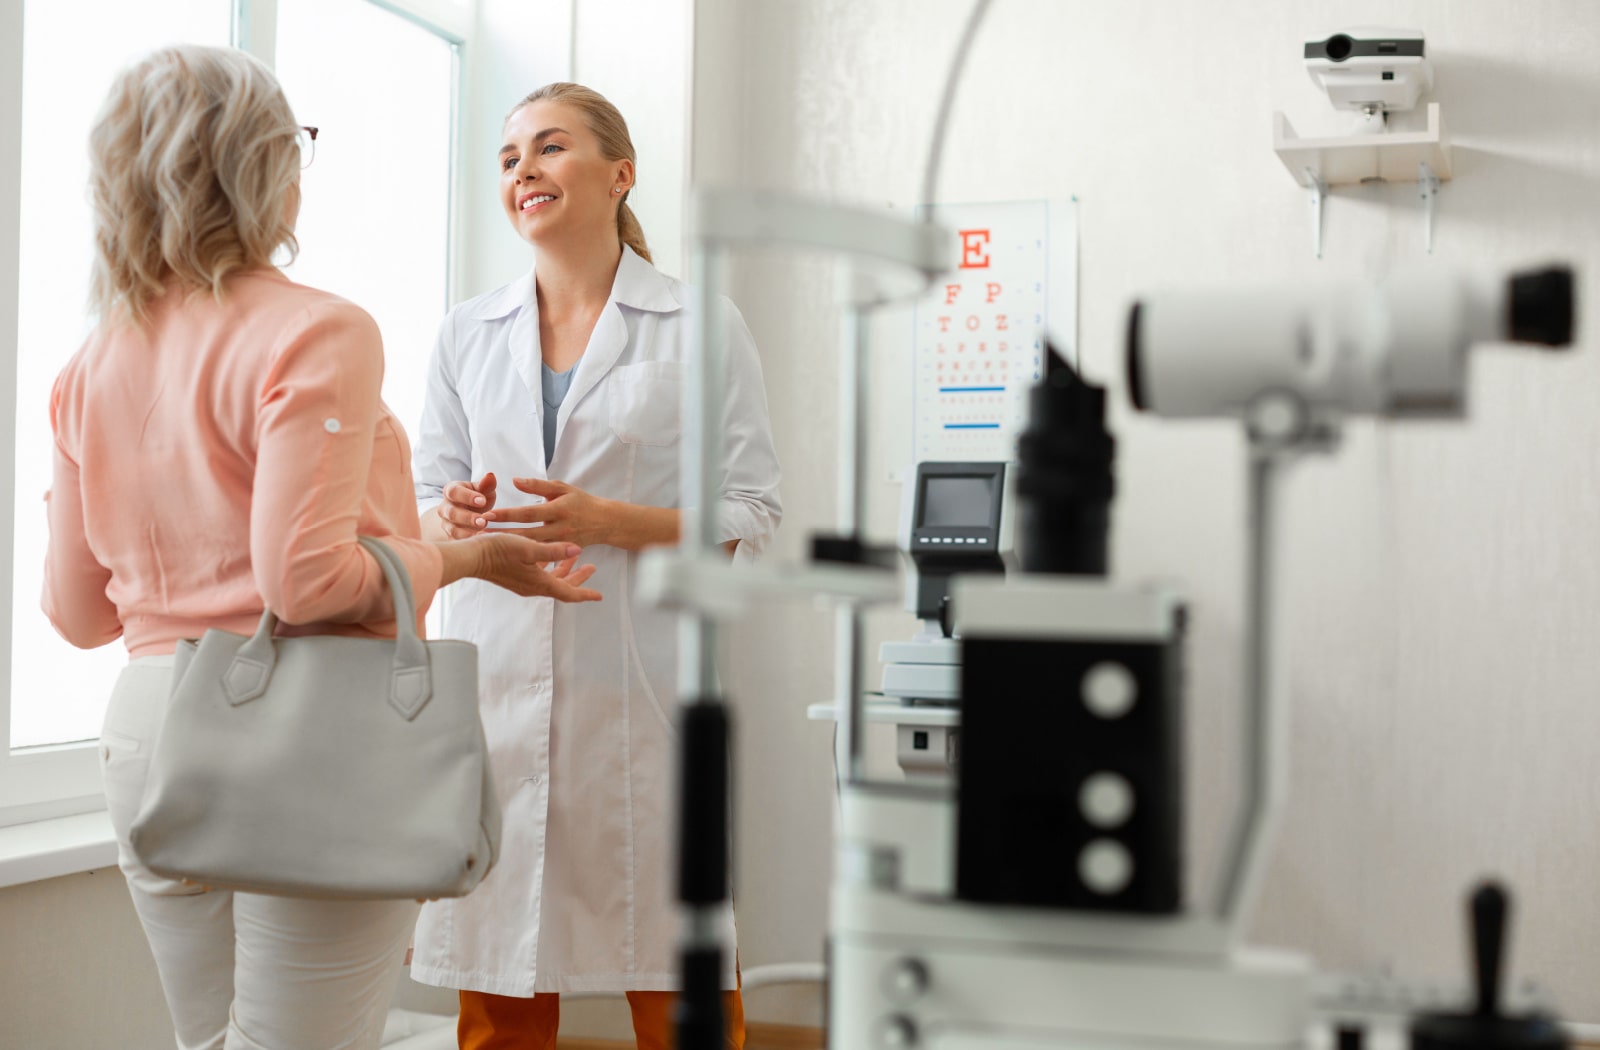 A female patient discusses dry eye treatment options with her optometrist